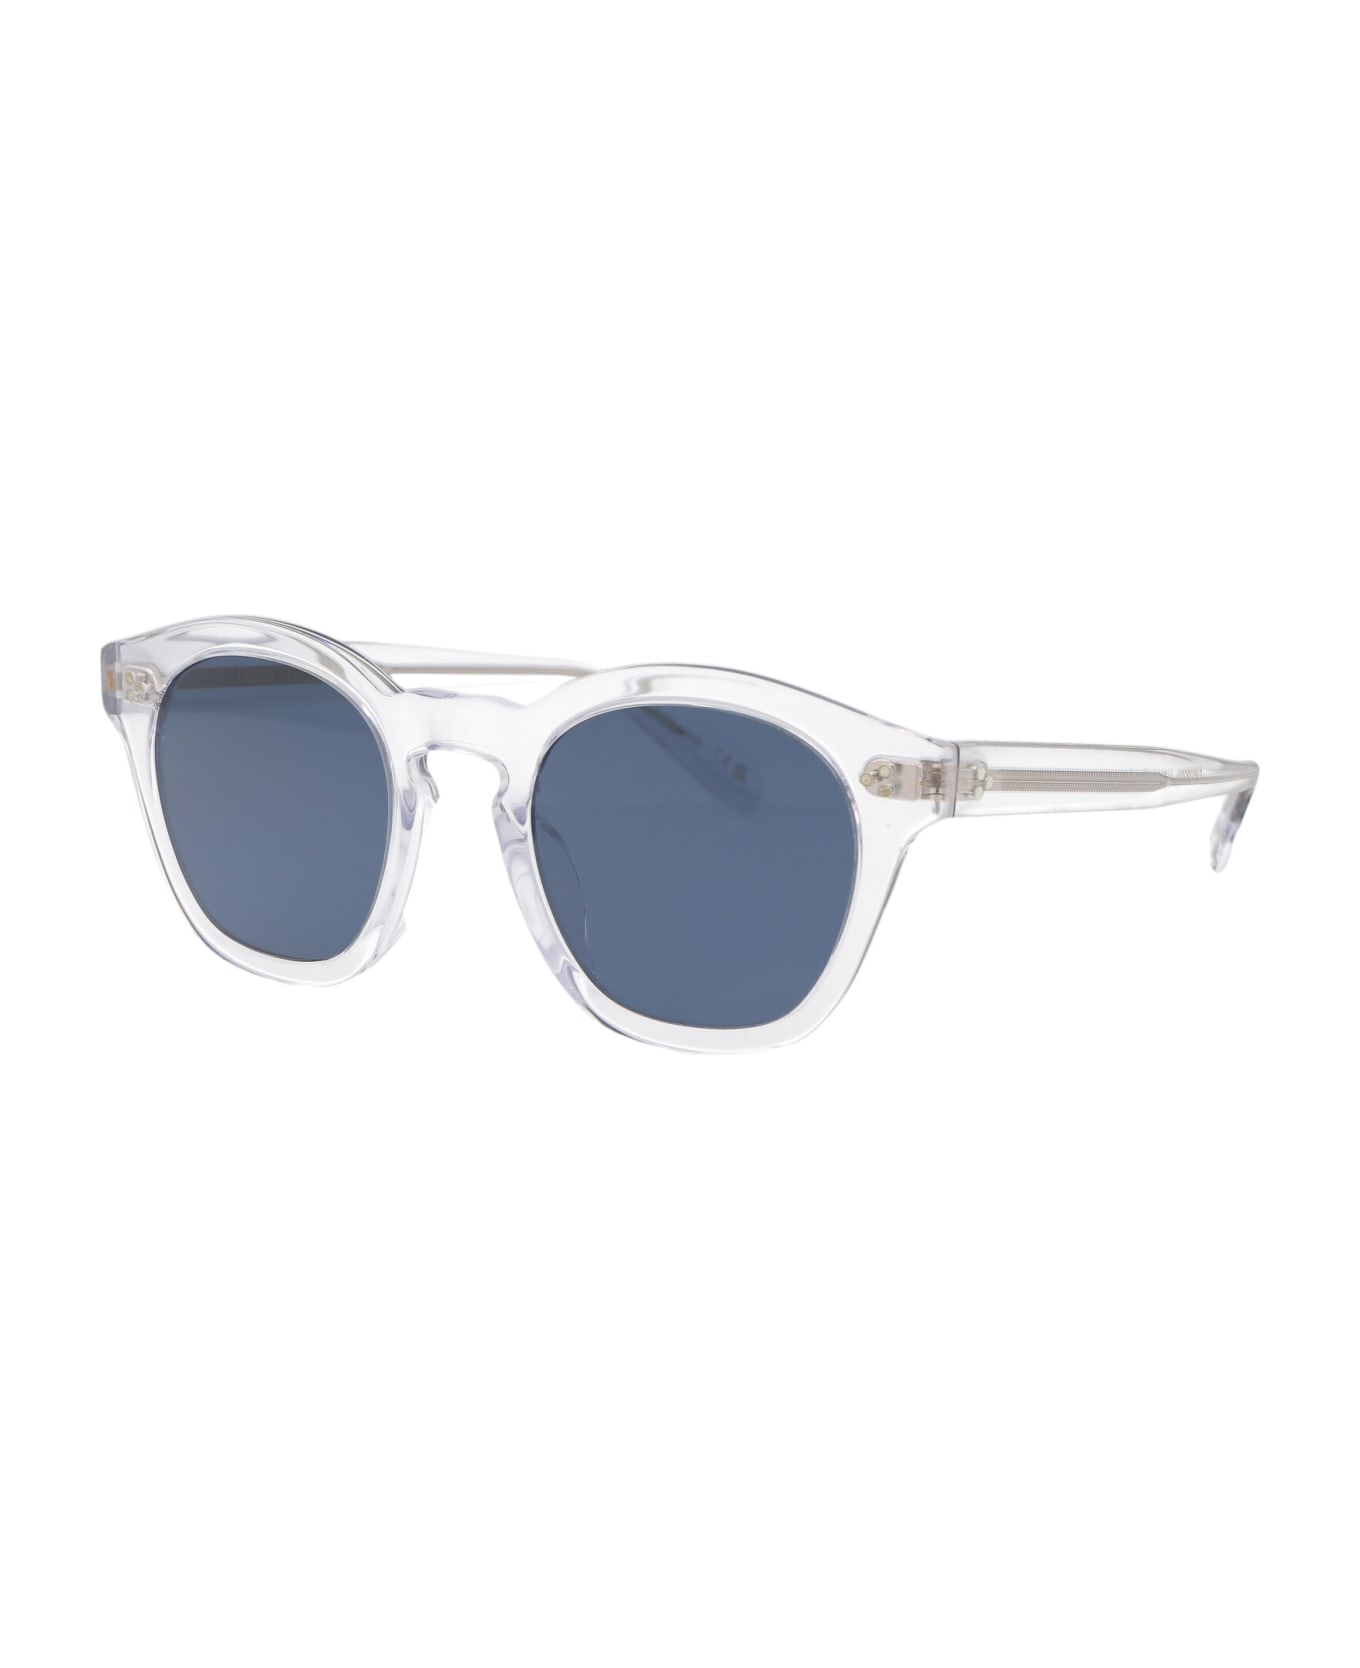 Oliver Peoples Boudreau L.a Sunglasses - 110180 Crystal